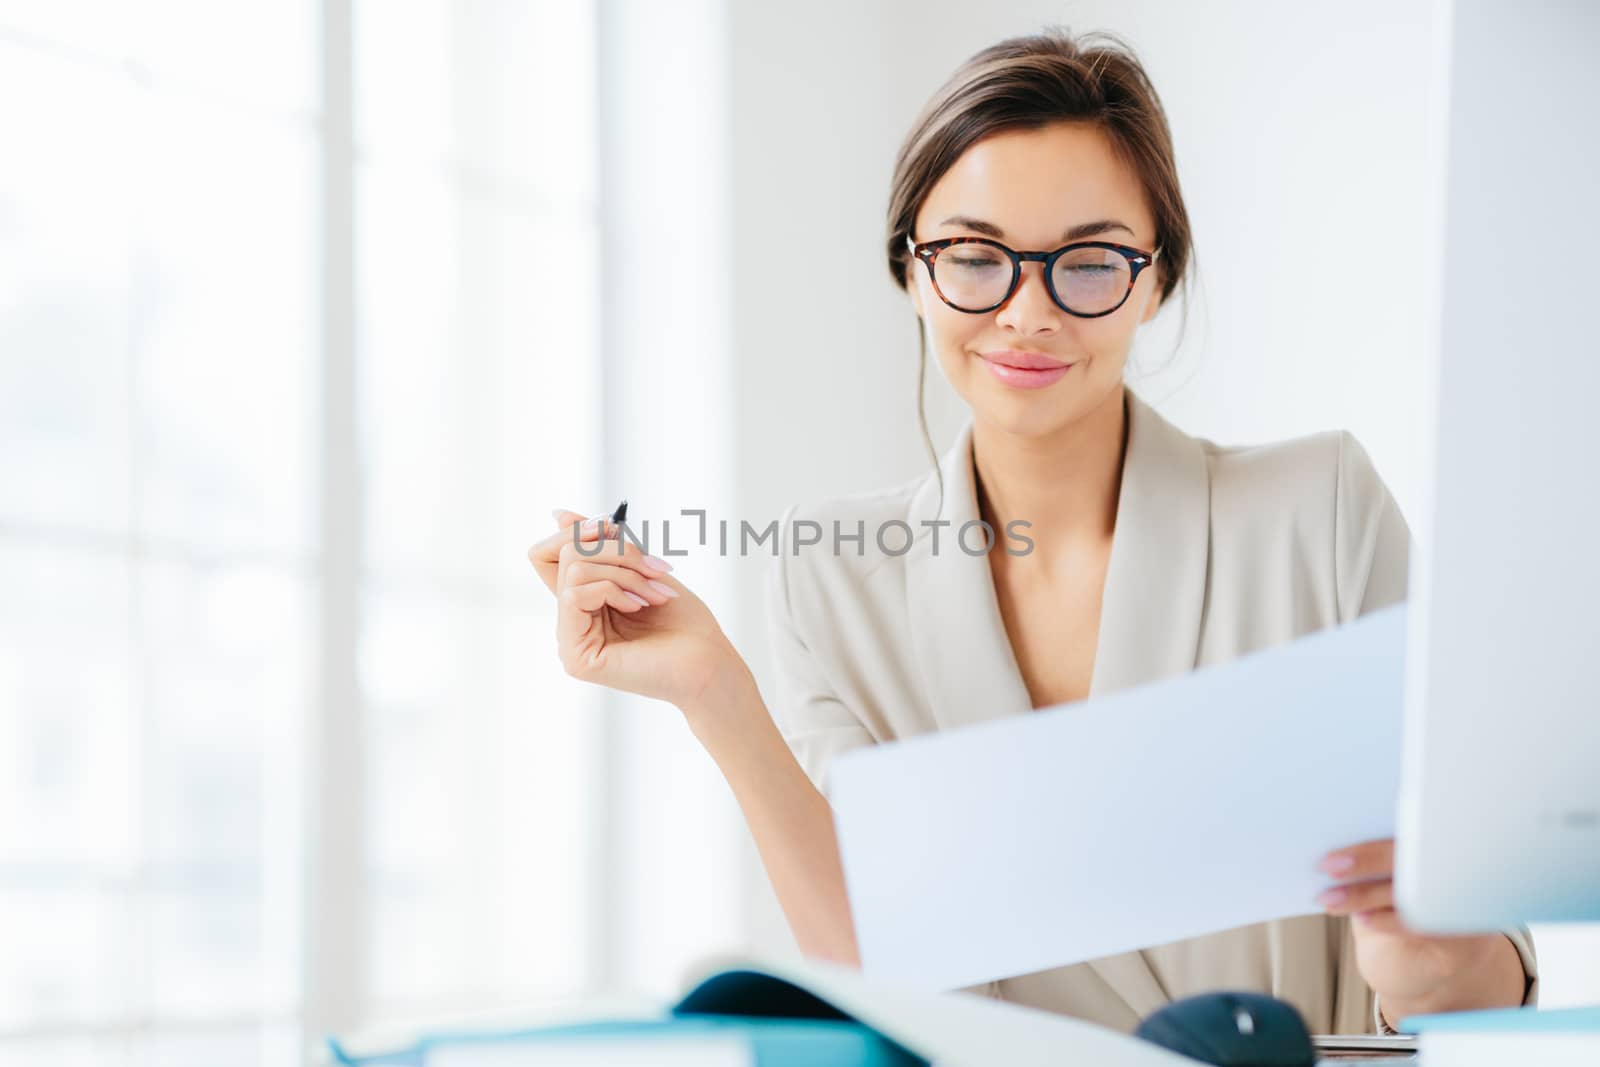 Concentrated successful businesswoman looks attentively in paper, studies terms of contract, holds pen, writes in documentations, dressed formally, poses at desktop against white spacious interior